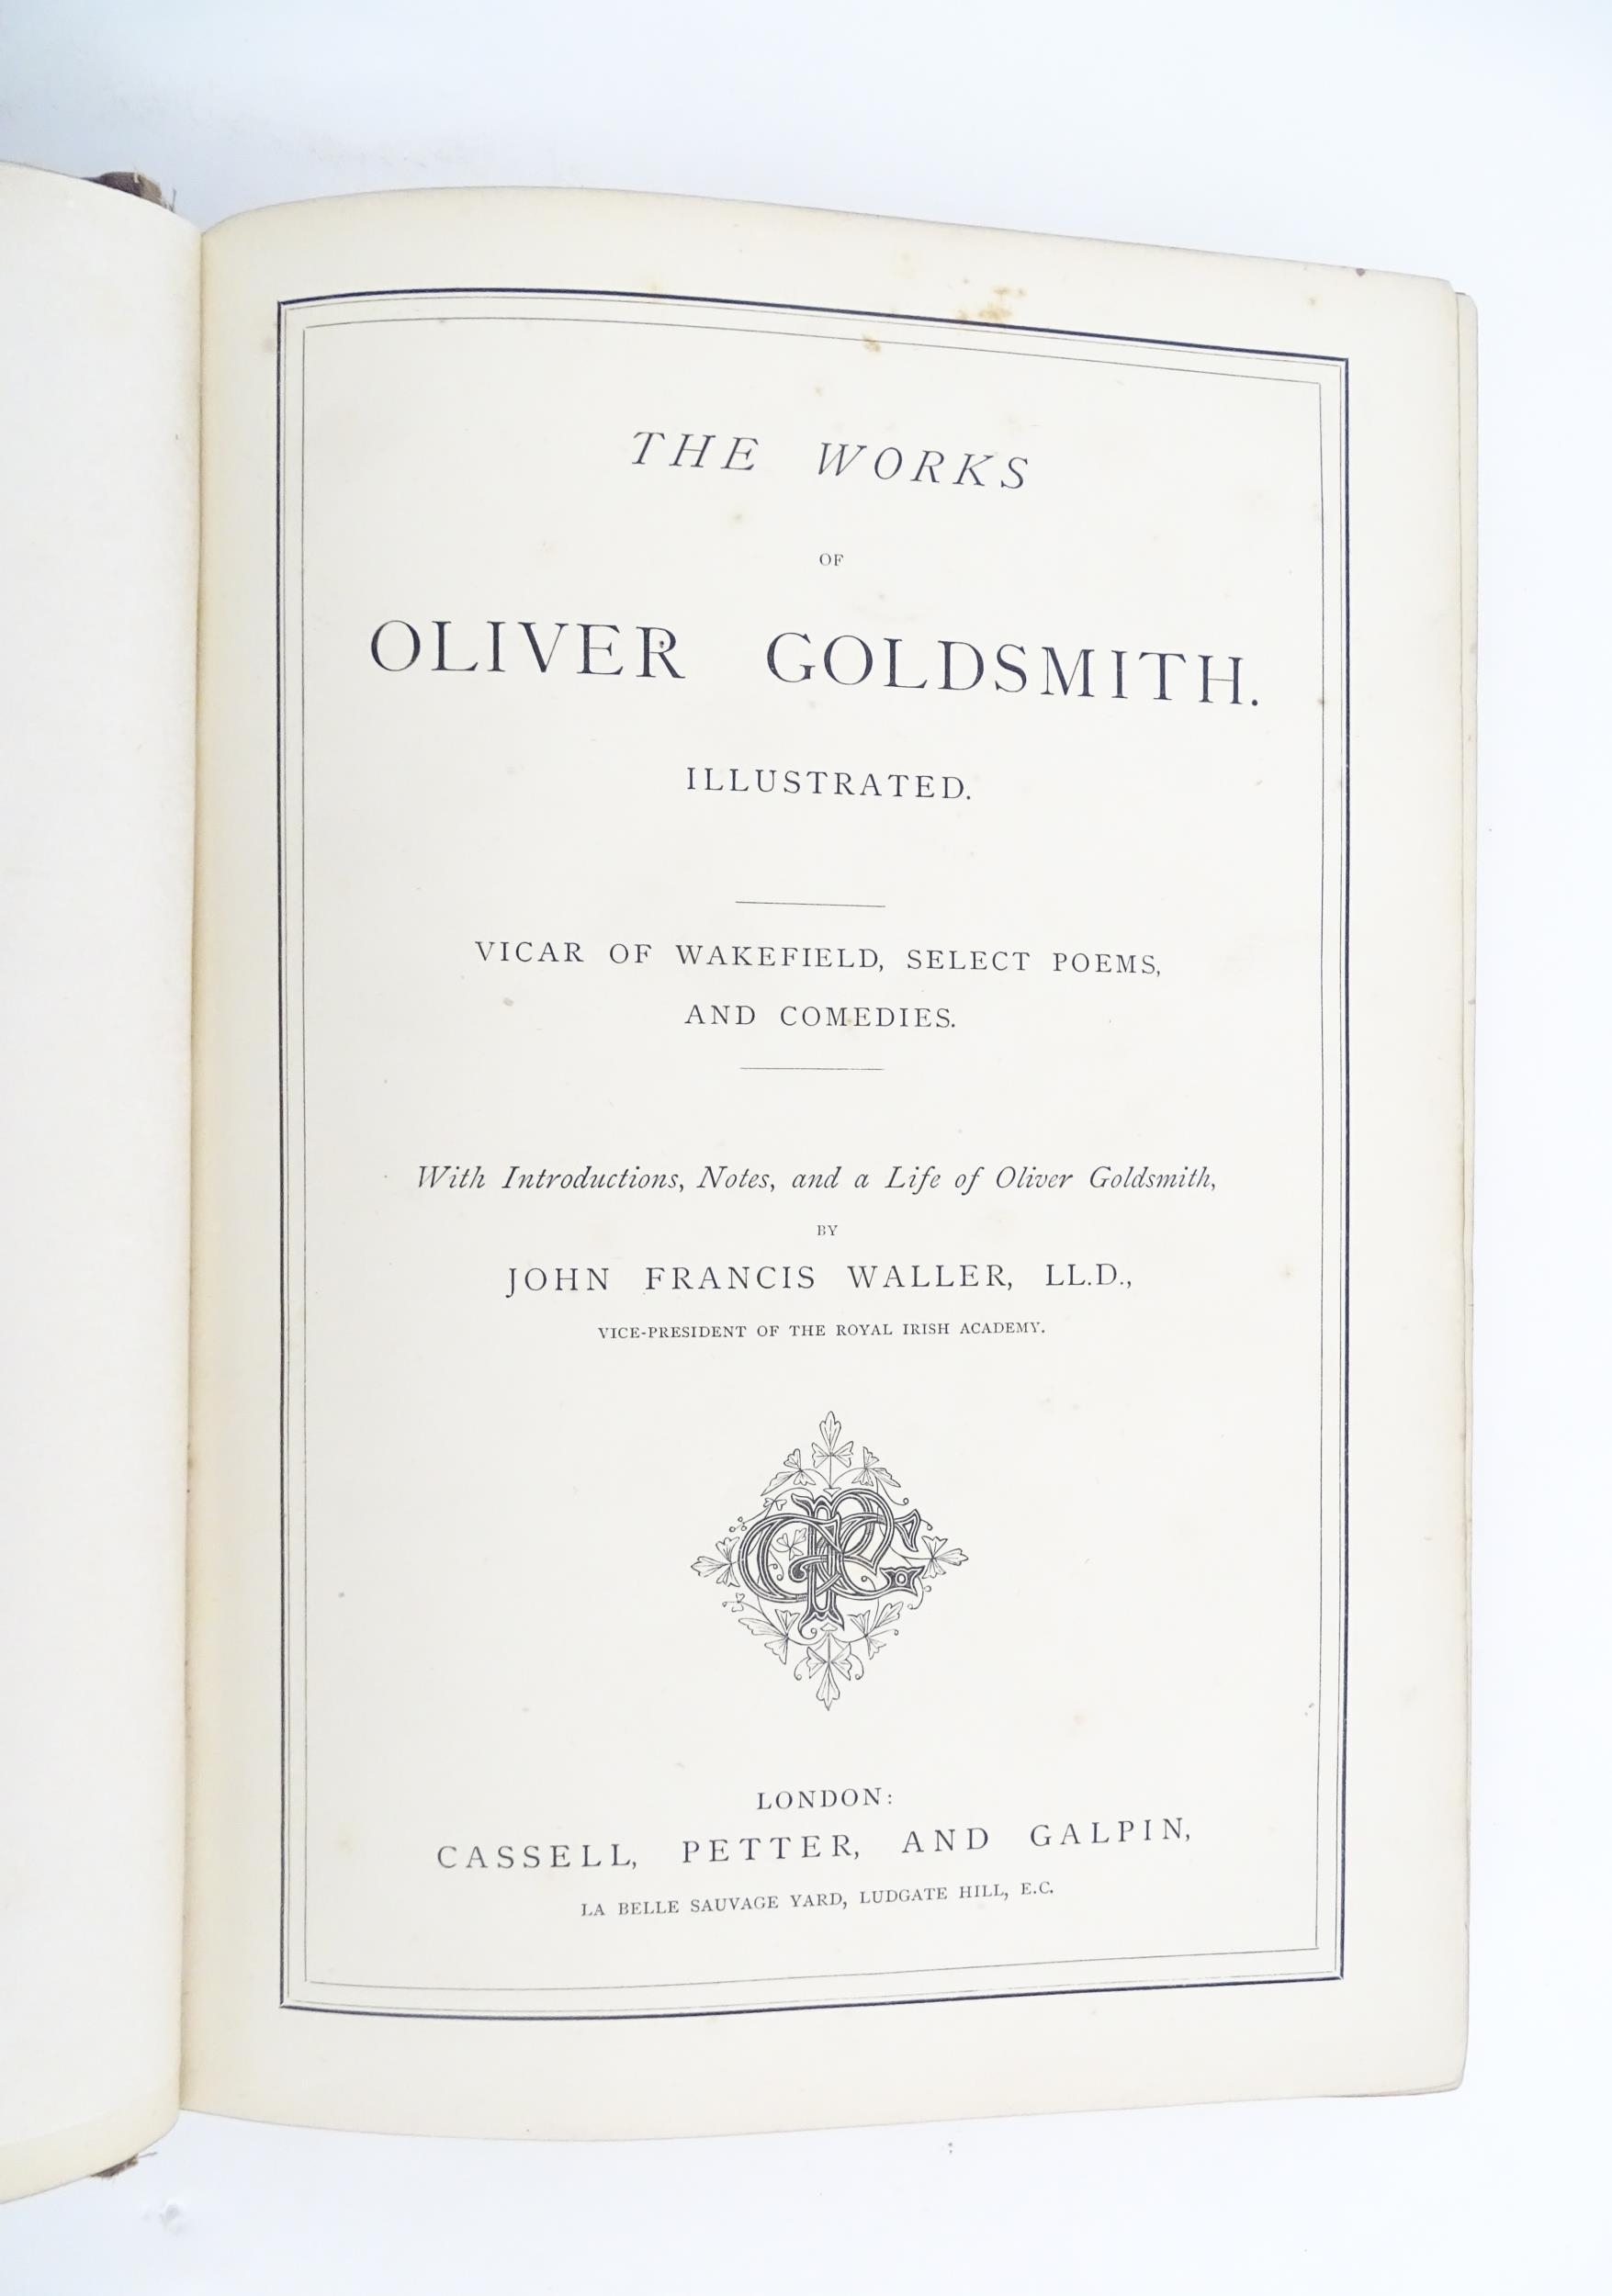 Book: The Works of Oliver Goldsmith Illustrated Vicar of Wakefield, Select Poems and Comedies, - Image 4 of 7